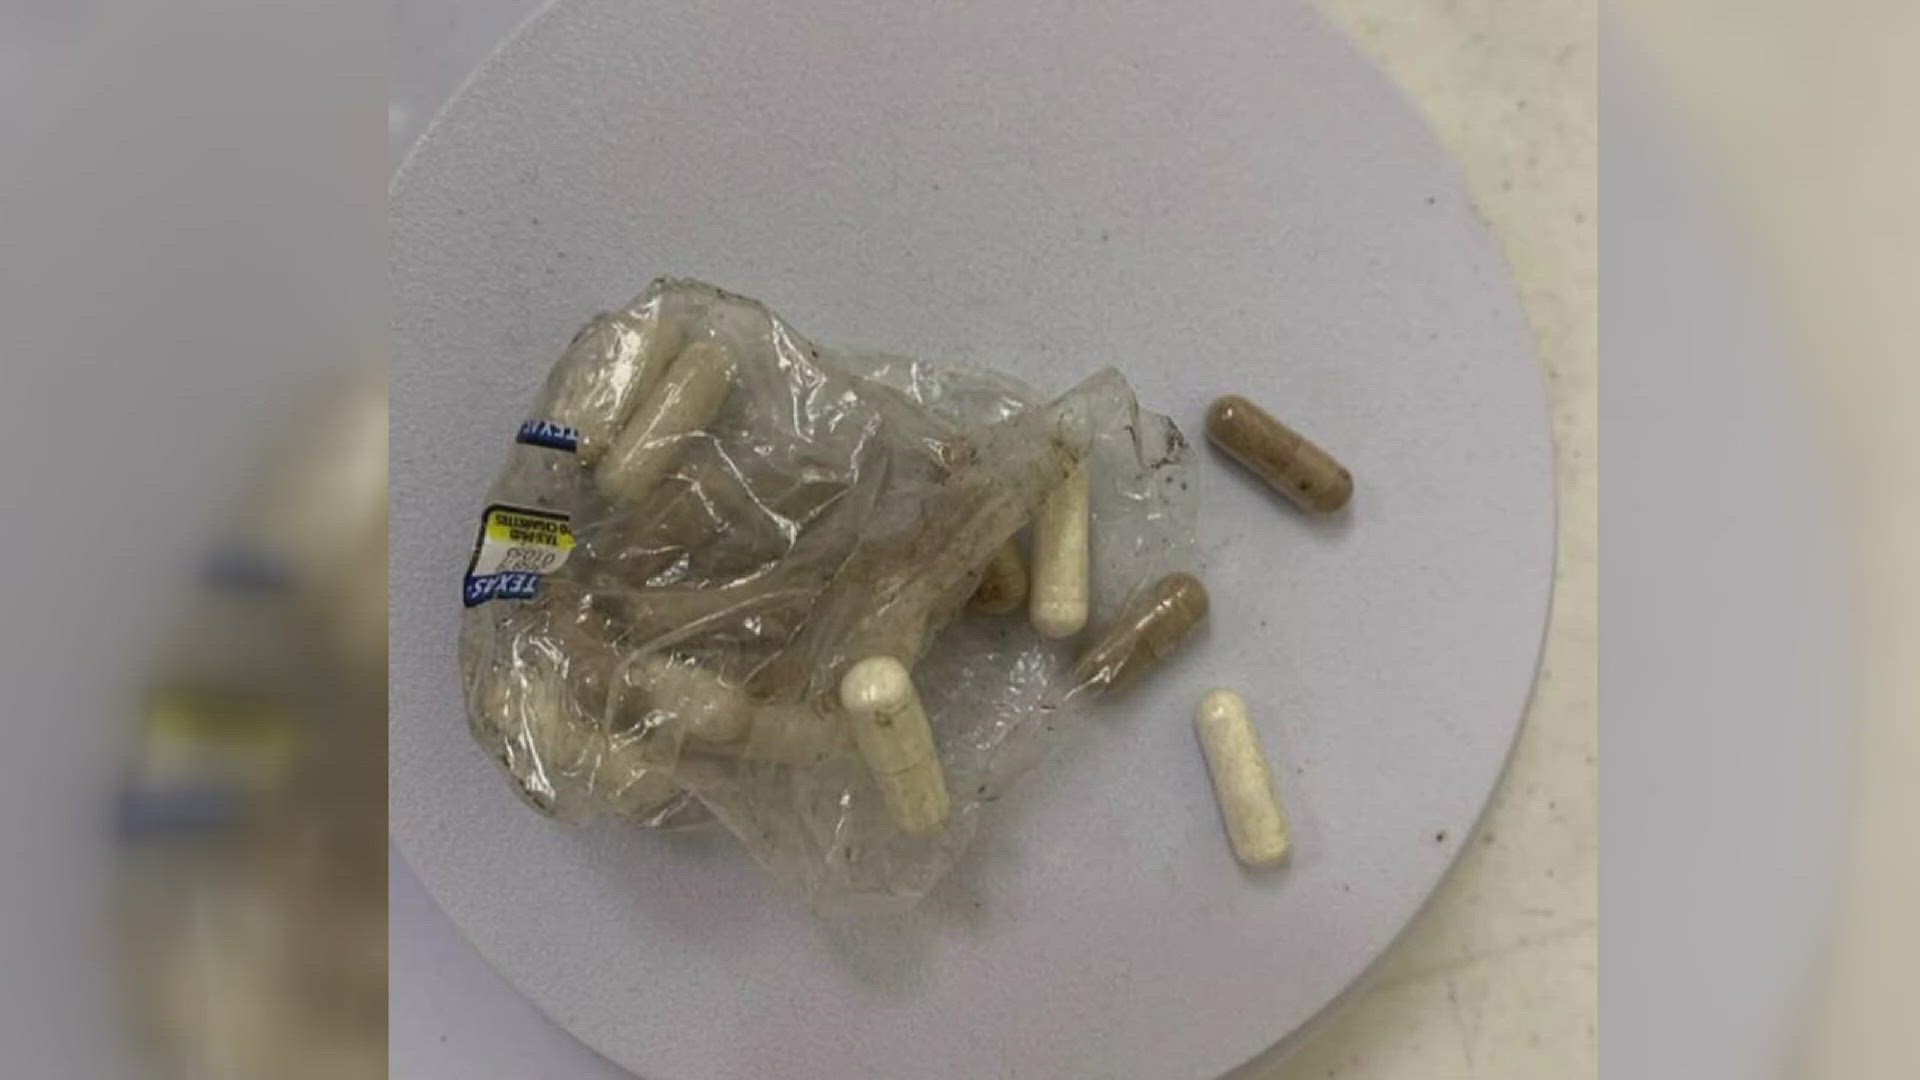 Two Beaumont men have been arrested after suspected drugs were seized from their vehicle.